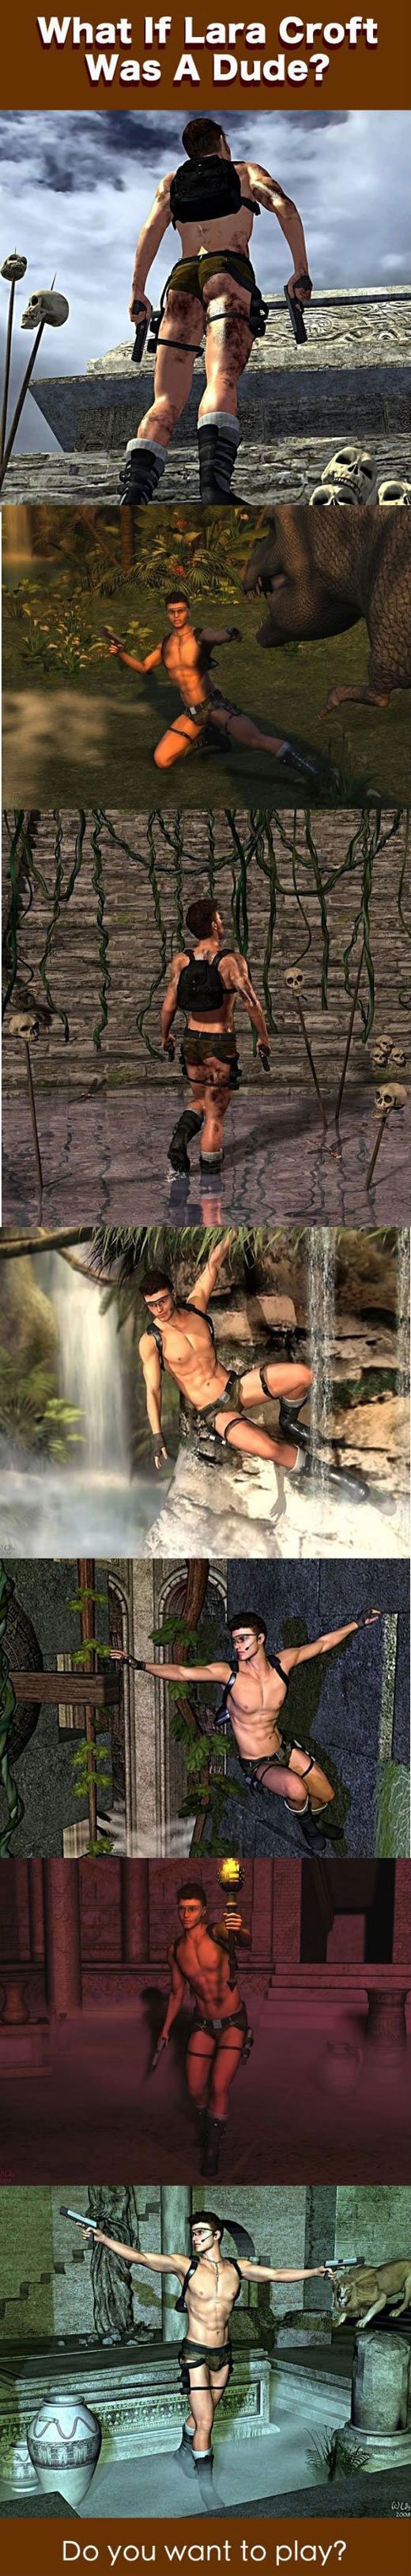 What if Lara Croft was a man…im perfectly okay with this actually